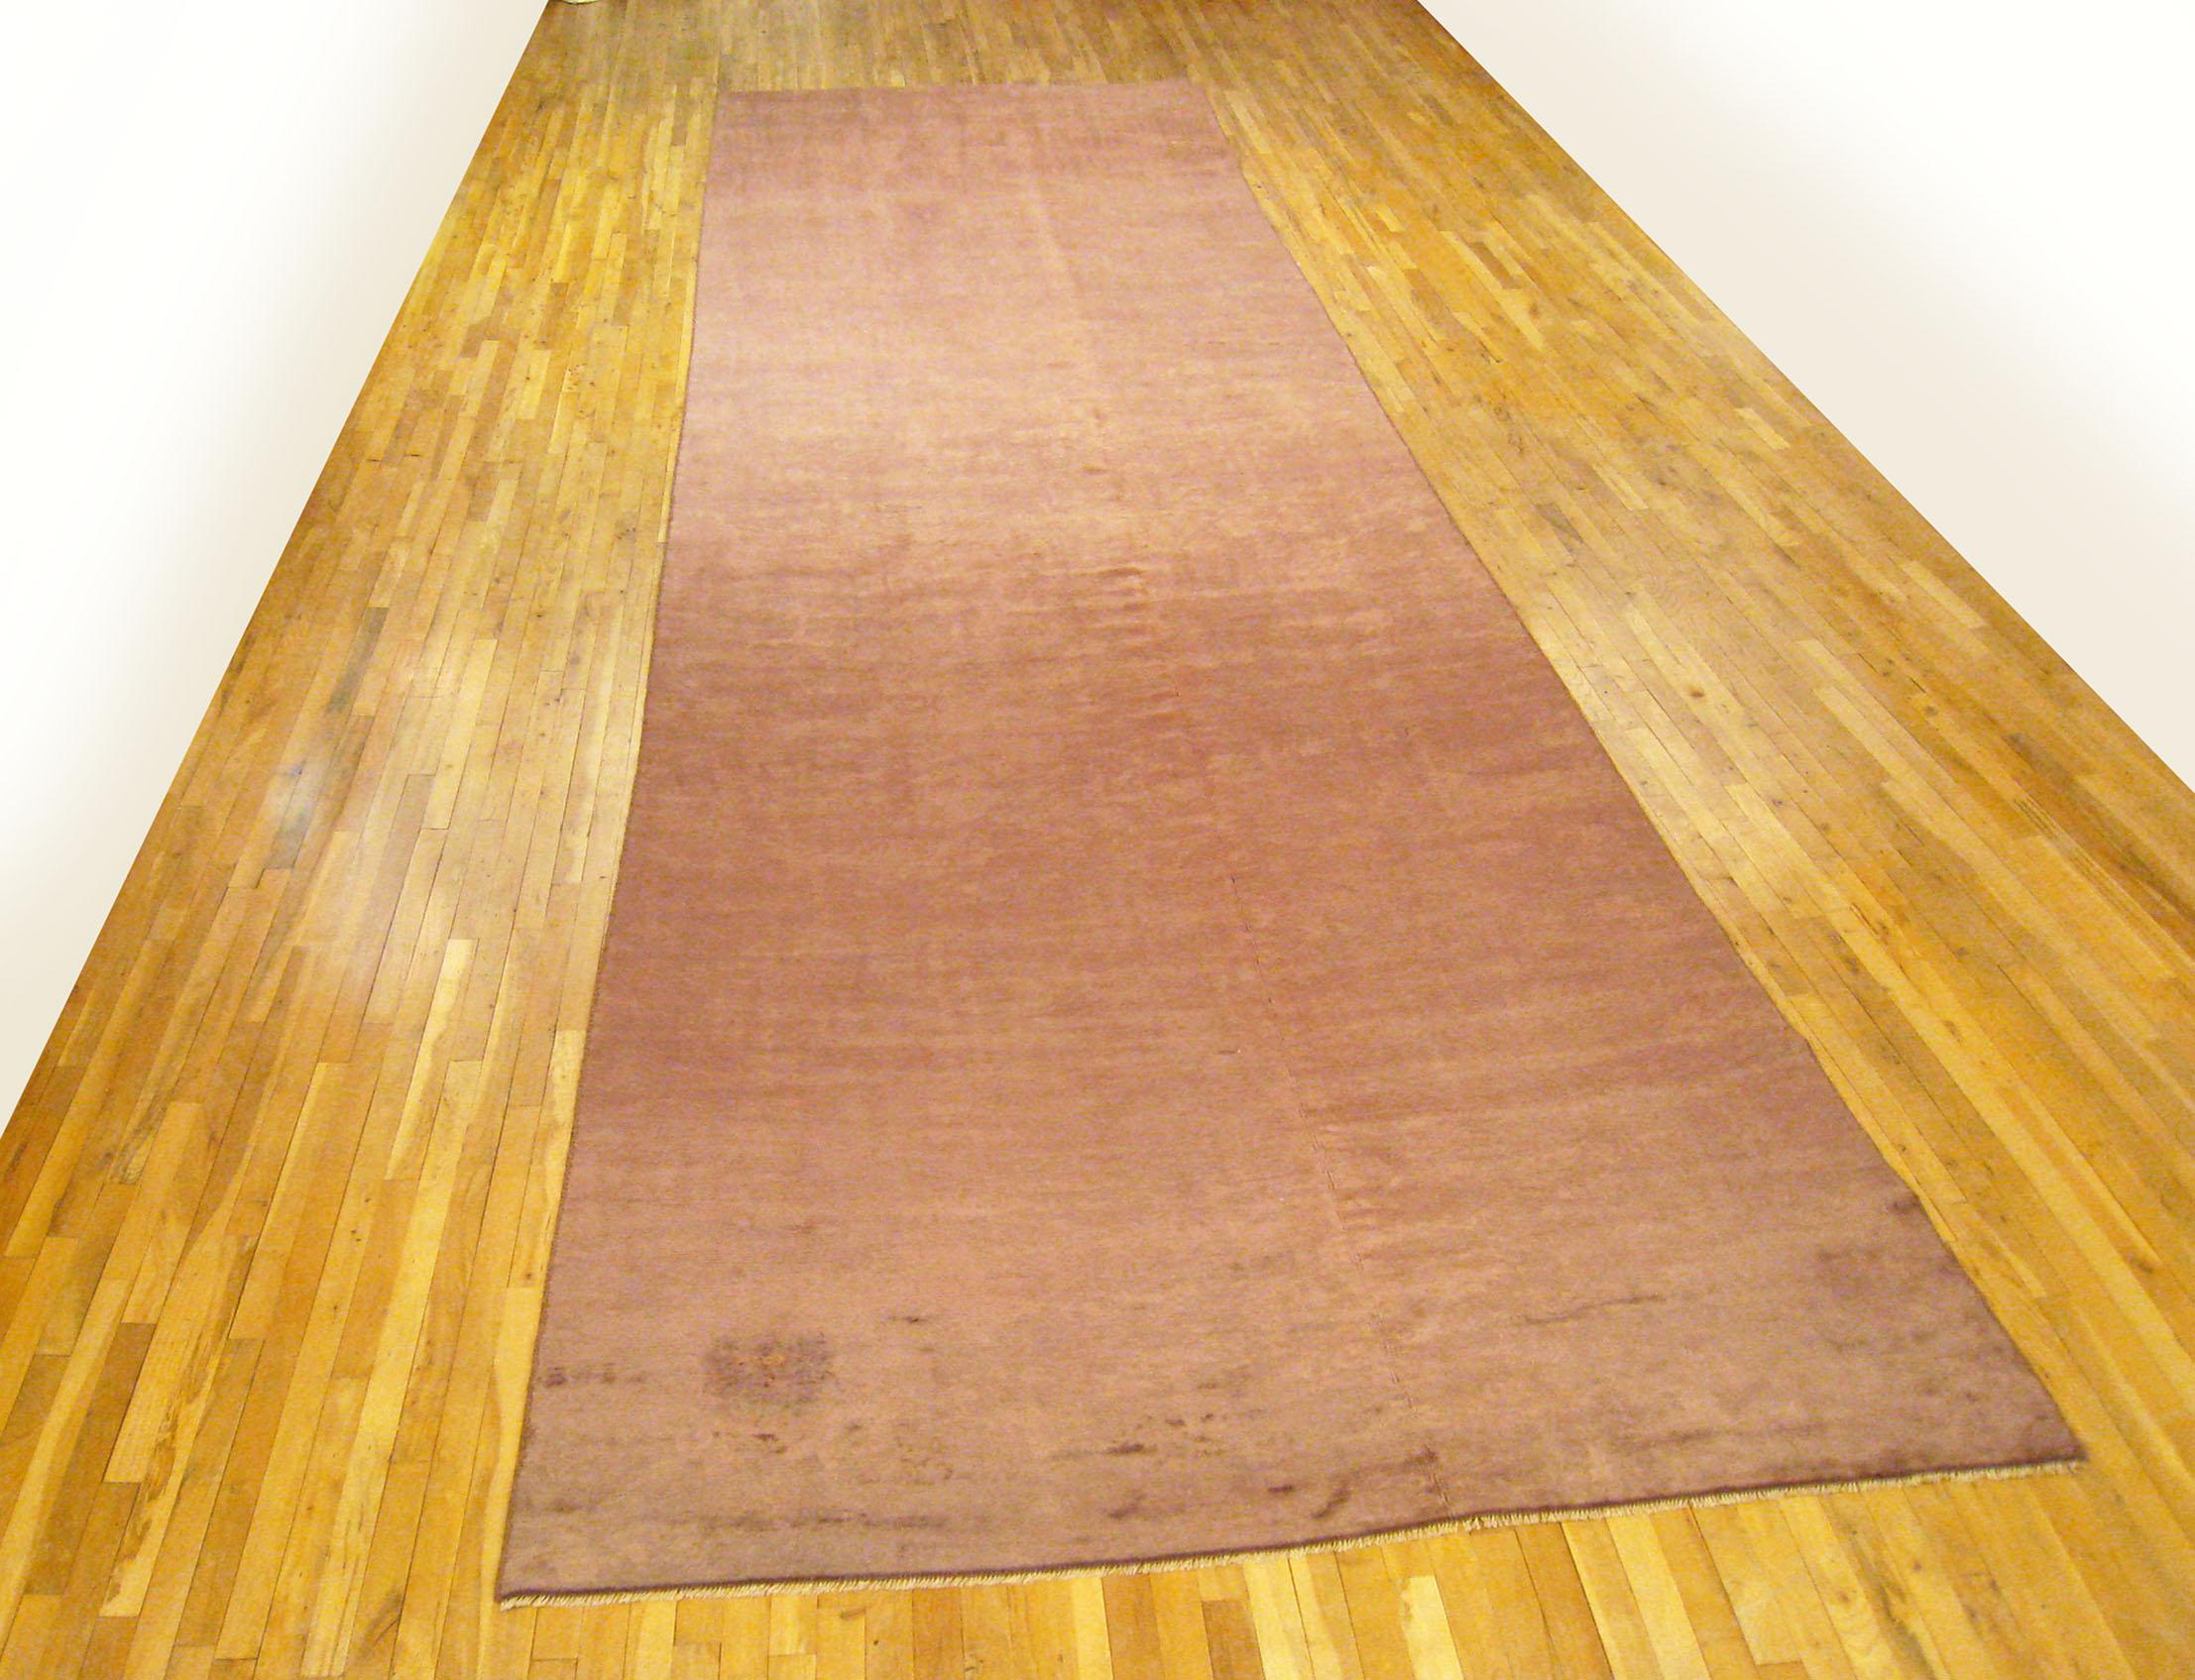 Vintage Spanish Savonnerie rug, Gallery size, circa 1920

A one-of-a-kind vintage Spanish Savonnerie oriental carpet, hand-knotted with soft wool pile. Featuring a large mauve open field, in gallery size, size 22' 6